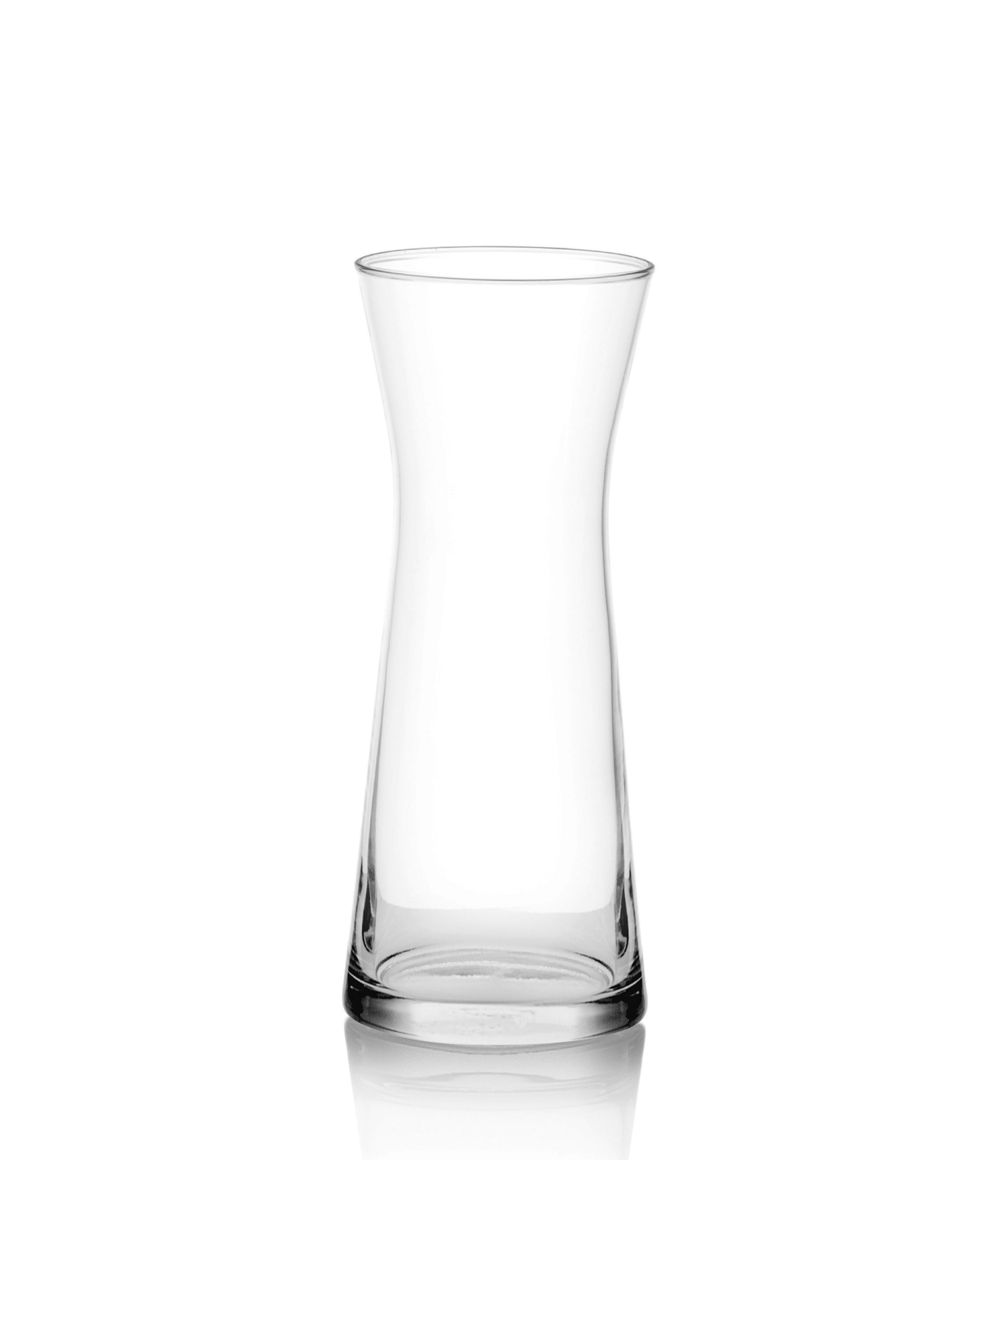 Ocean Tempo Carafe Glass 610ml Pack Of 6